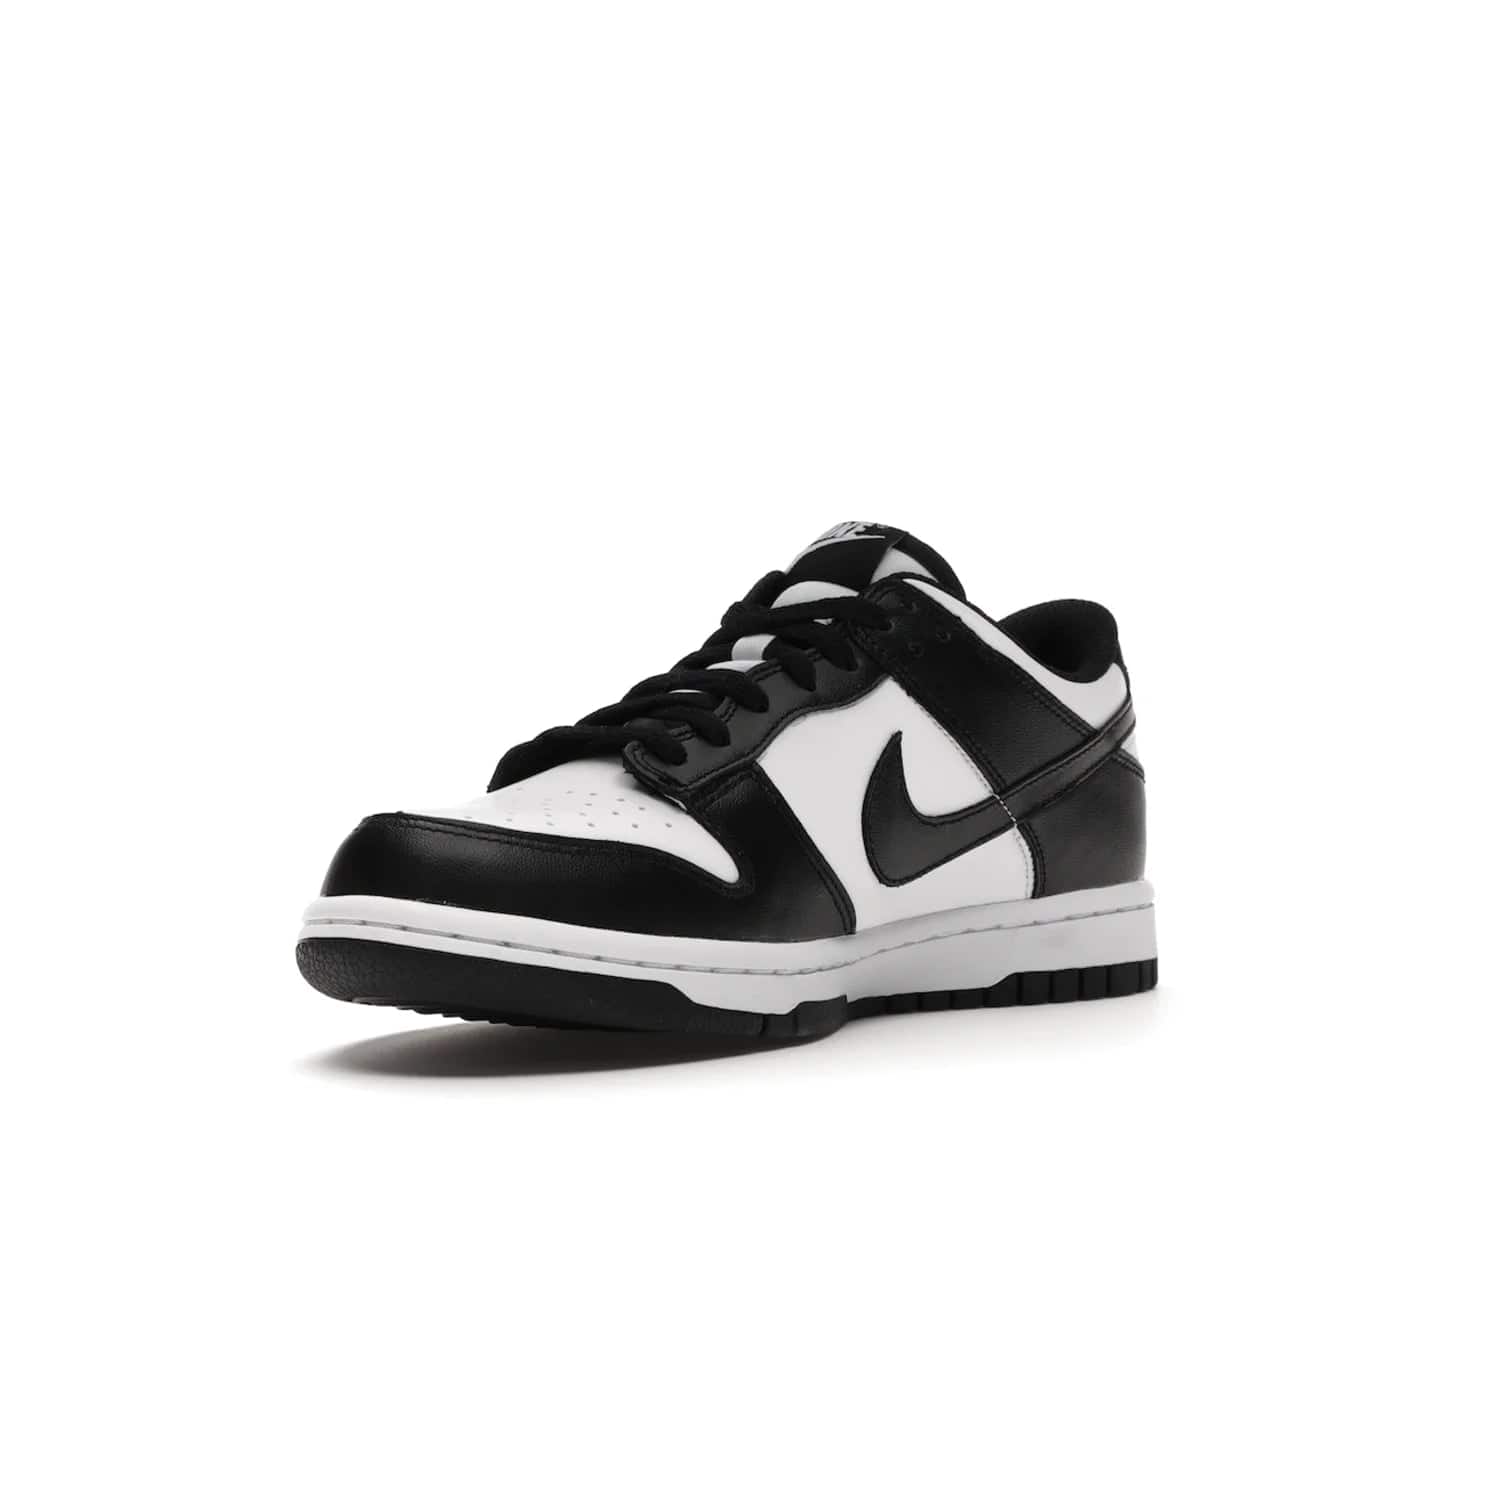 Nike Dunk Low Retro White Black Panda (2021) (GS) - Image 14 - Only at www.BallersClubKickz.com - Upgrade your style with the Nike Dunk Low Retro White Black (GS). Featuring premium leather, iconic Nike text, signature Swoosh logo and striking black/white colorway, this striking silhouette is the perfect mix of style and comfort. Colorway released in March 2021.